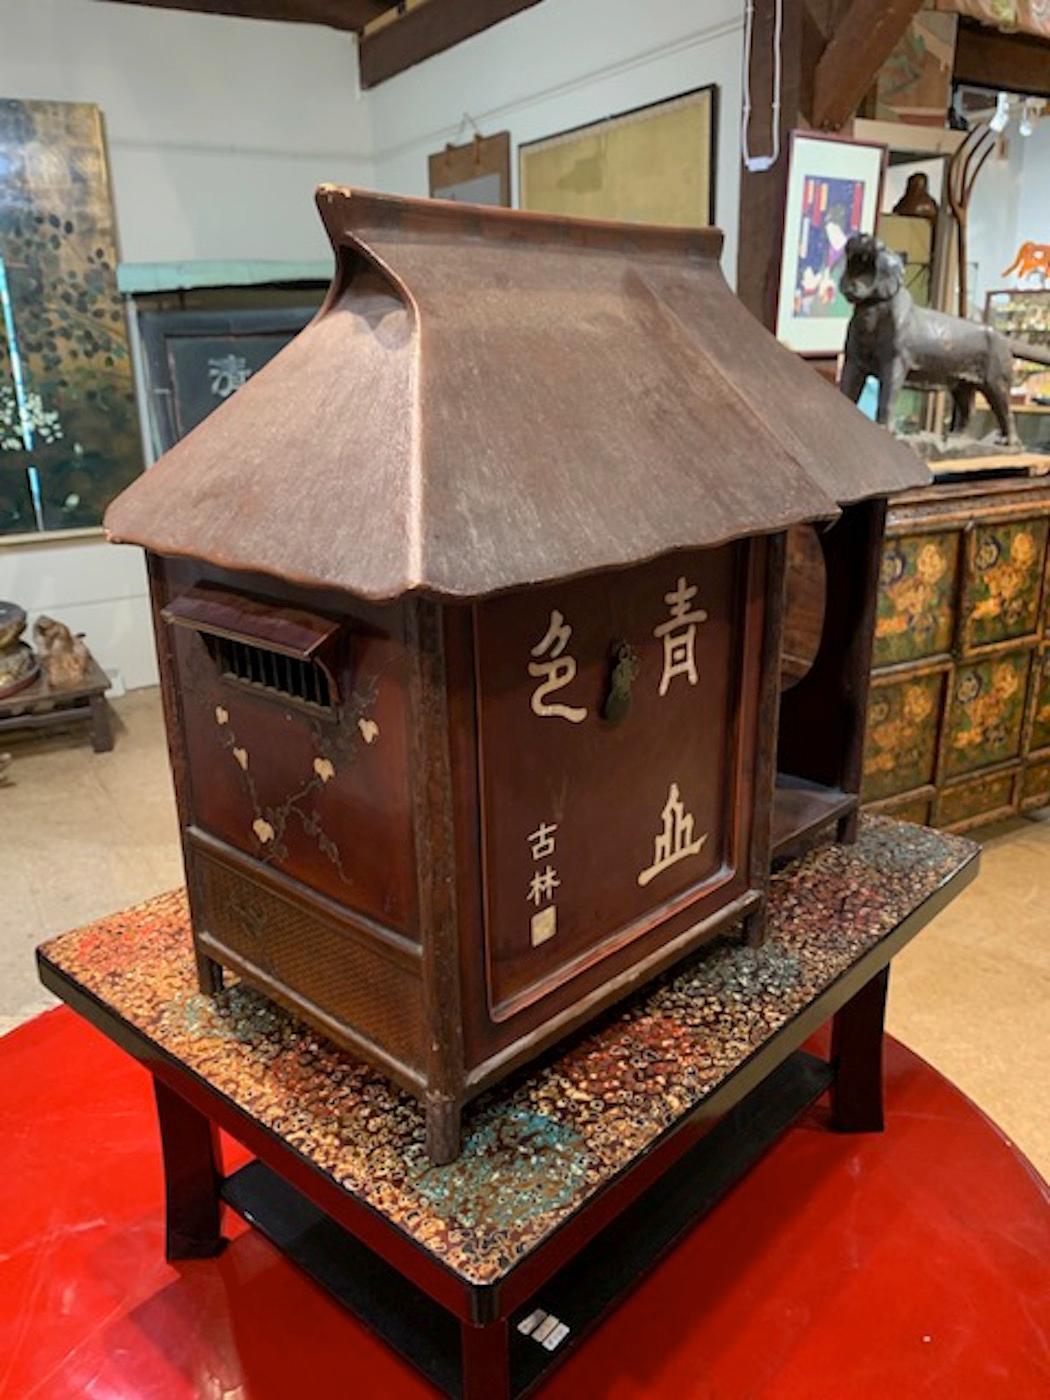 This tea chest is lacquered and inlayed with shell decorations. In the shape of a Japanese Minka or farmhouse - this cha dansu is from the Kyoto region and dates to the Taisho Period.